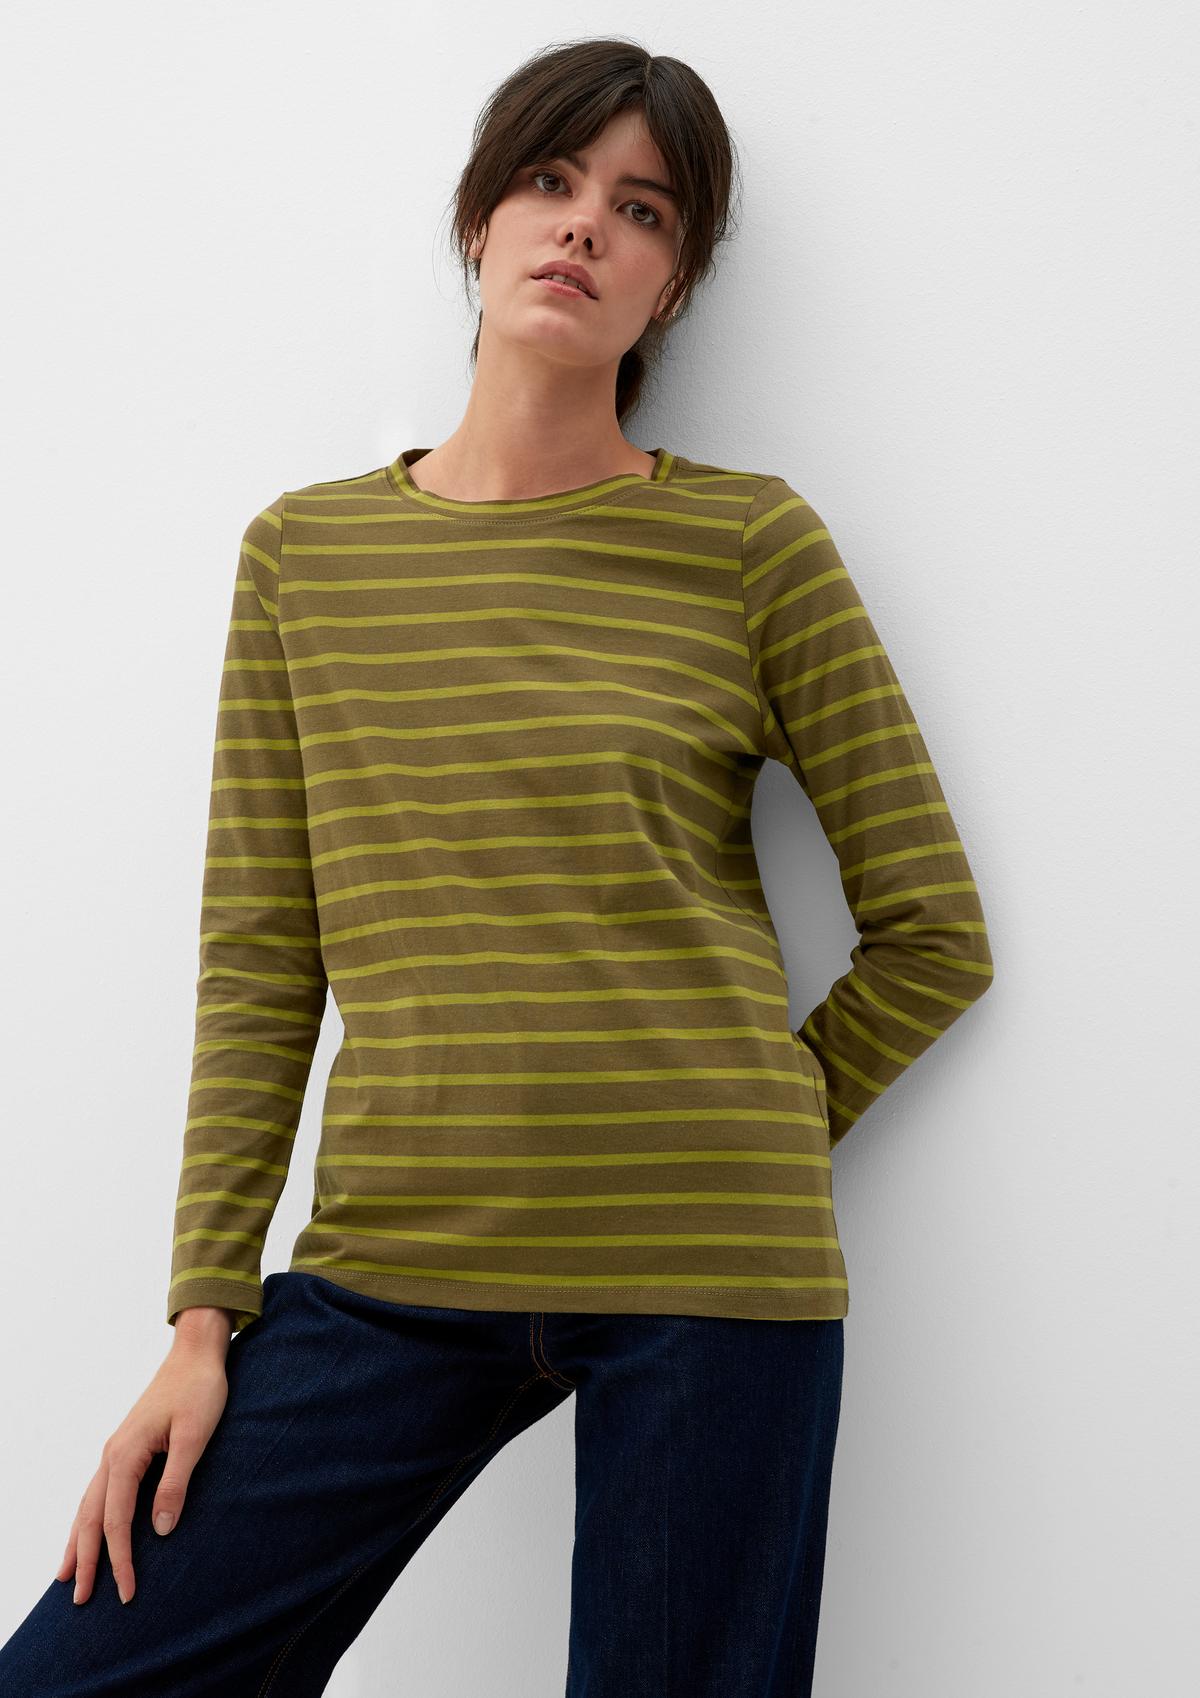 s.Oliver Long sleeve cotton jersey top